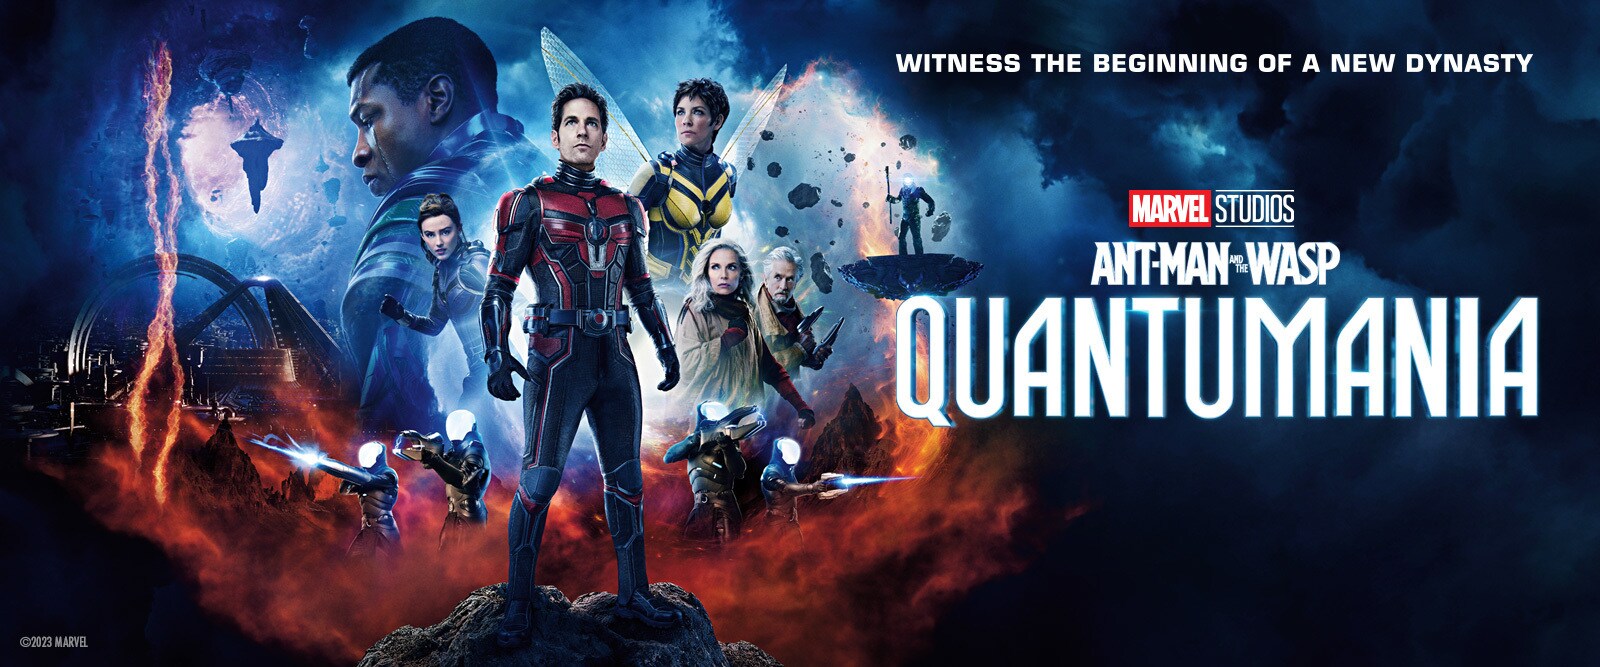 Homepage Hero - Marvel Studios' Ant-Man and The Wasp: Quantumania